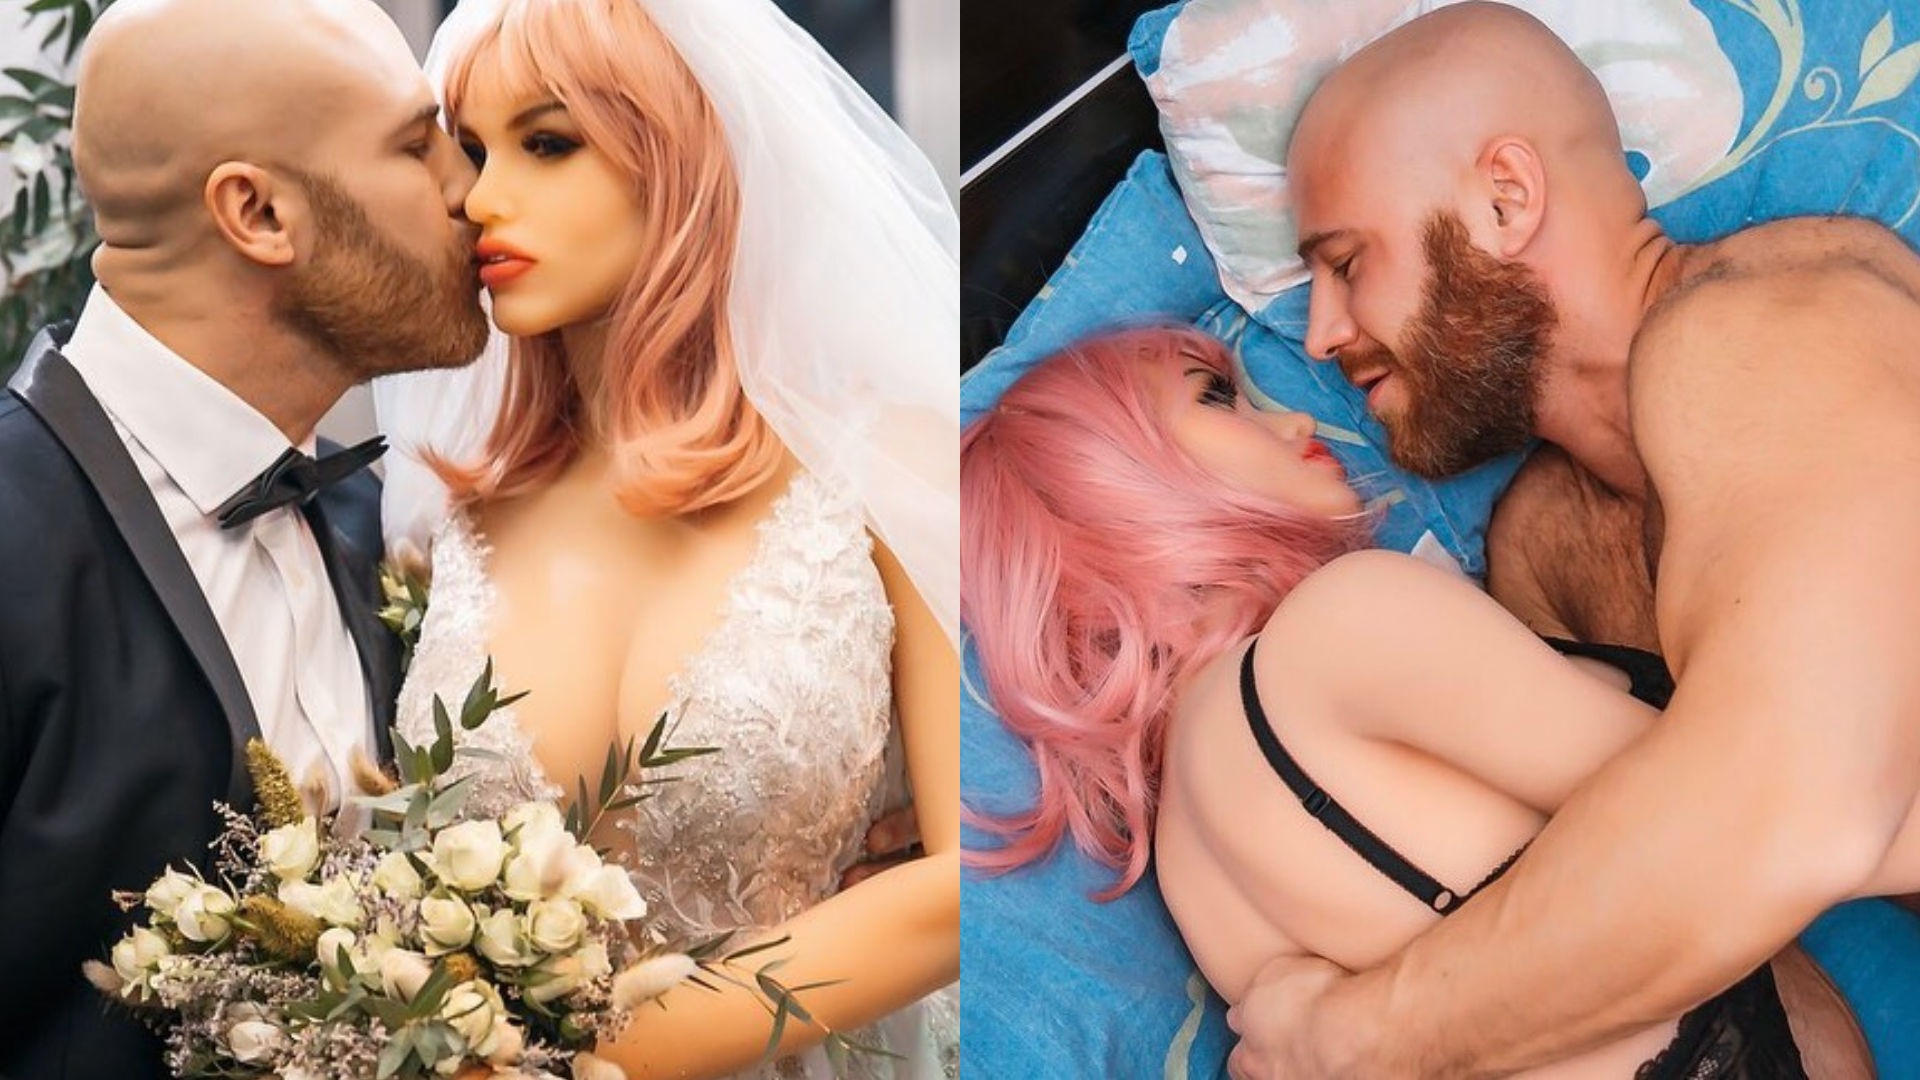 Meet the Man Who Married His Sex Doll hq nude pic